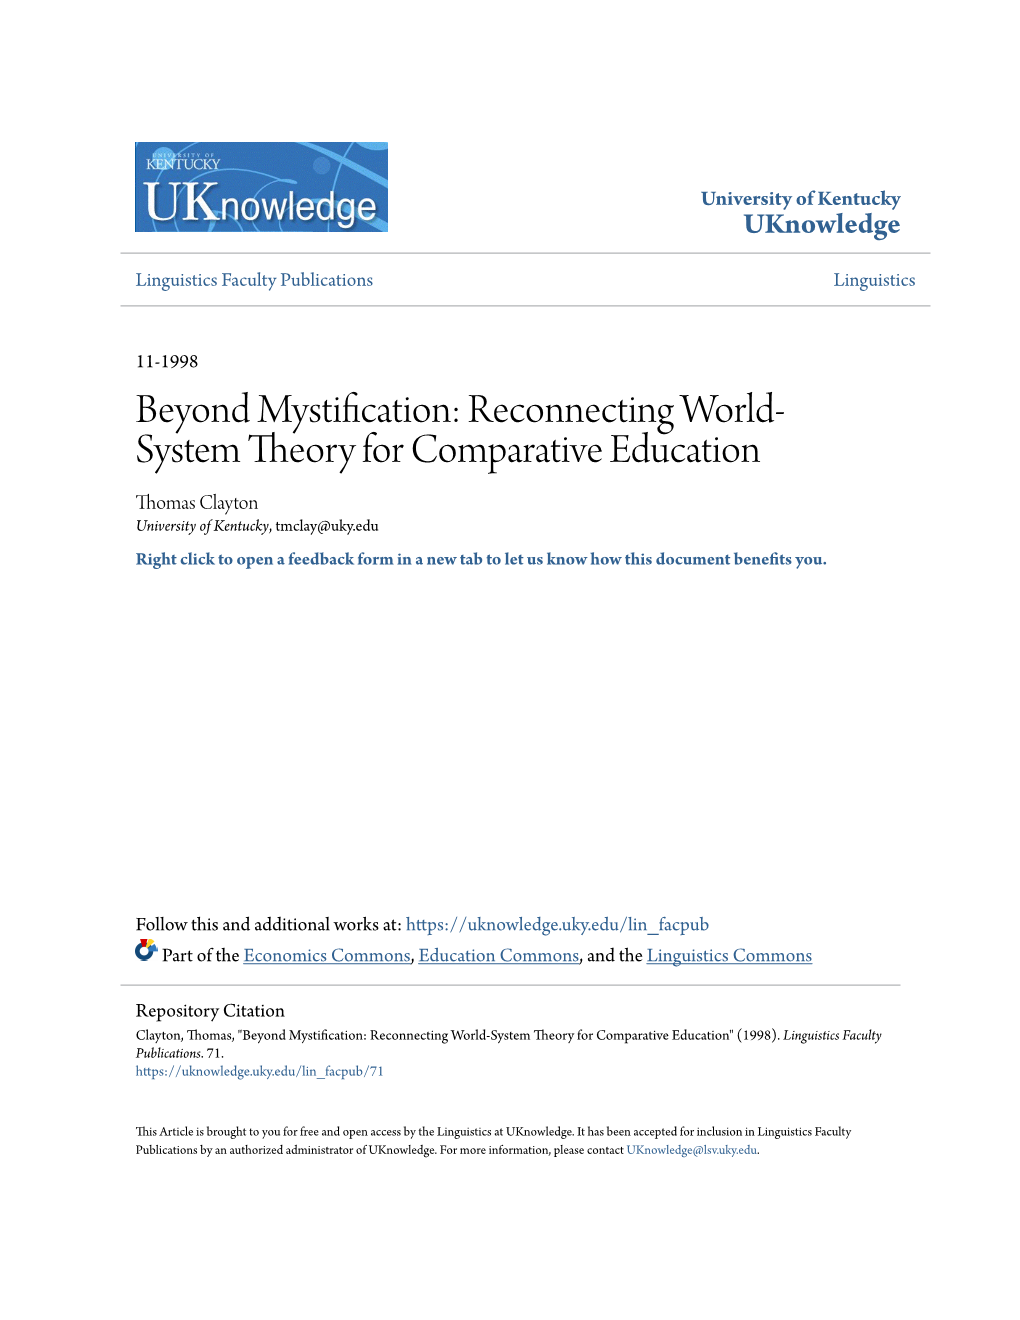 Reconnecting World-System Theory for Comparative Education" (1998)